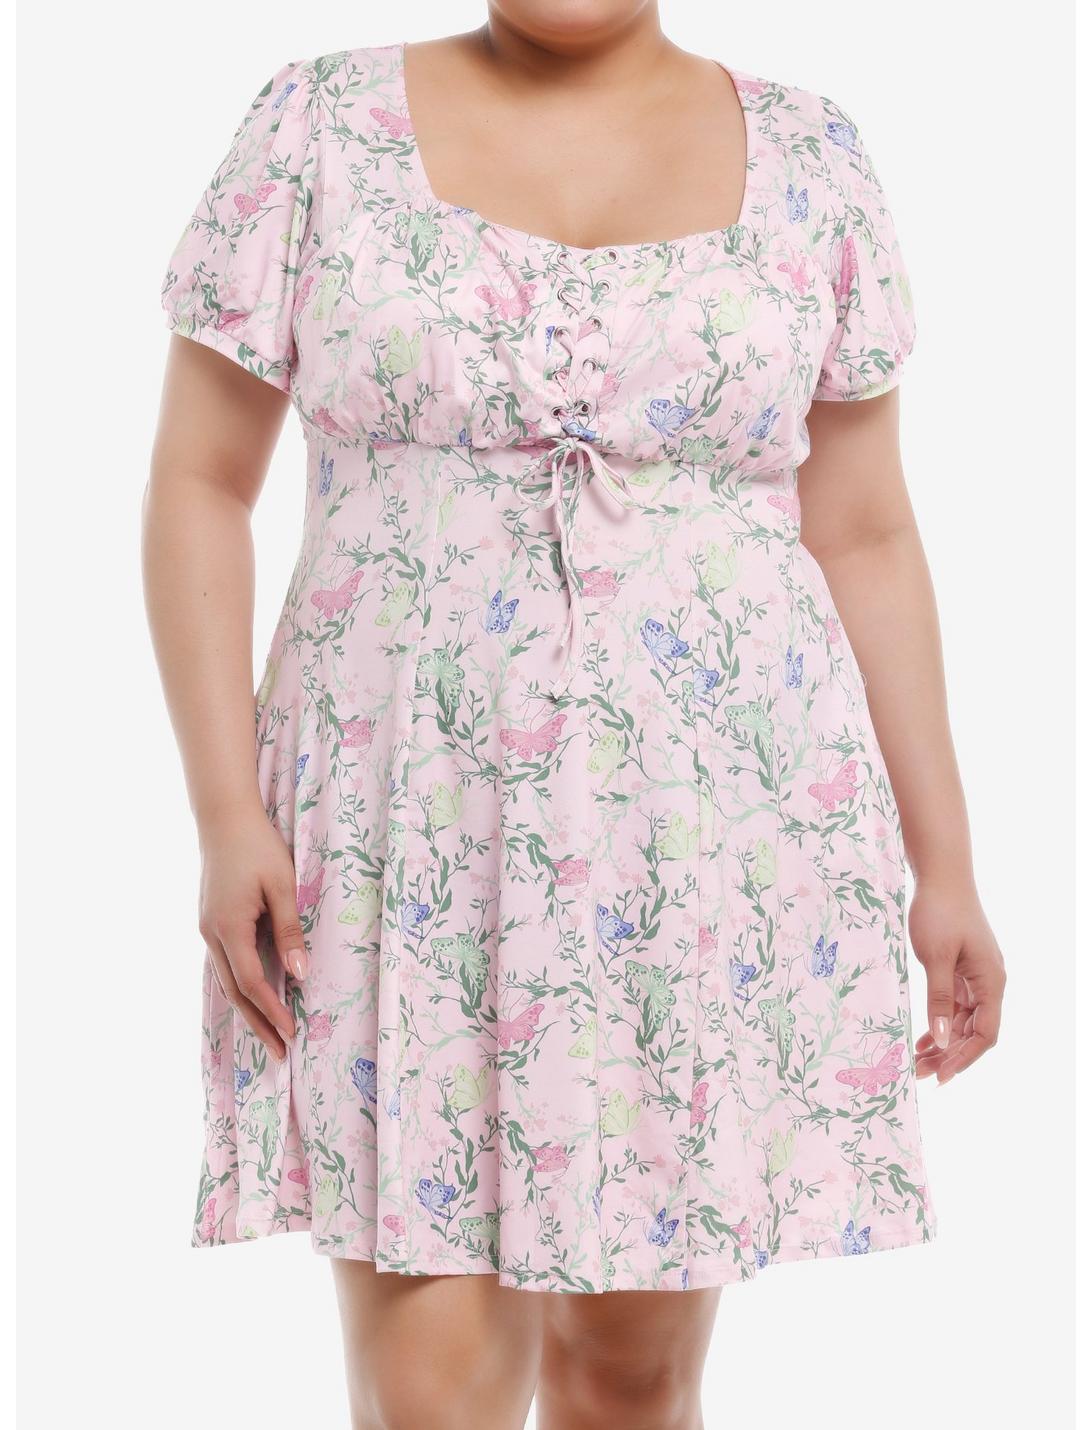 Thorn & Fable Pink Floral Butterfly Empire Dress Plus Size, MULTI, hi-res